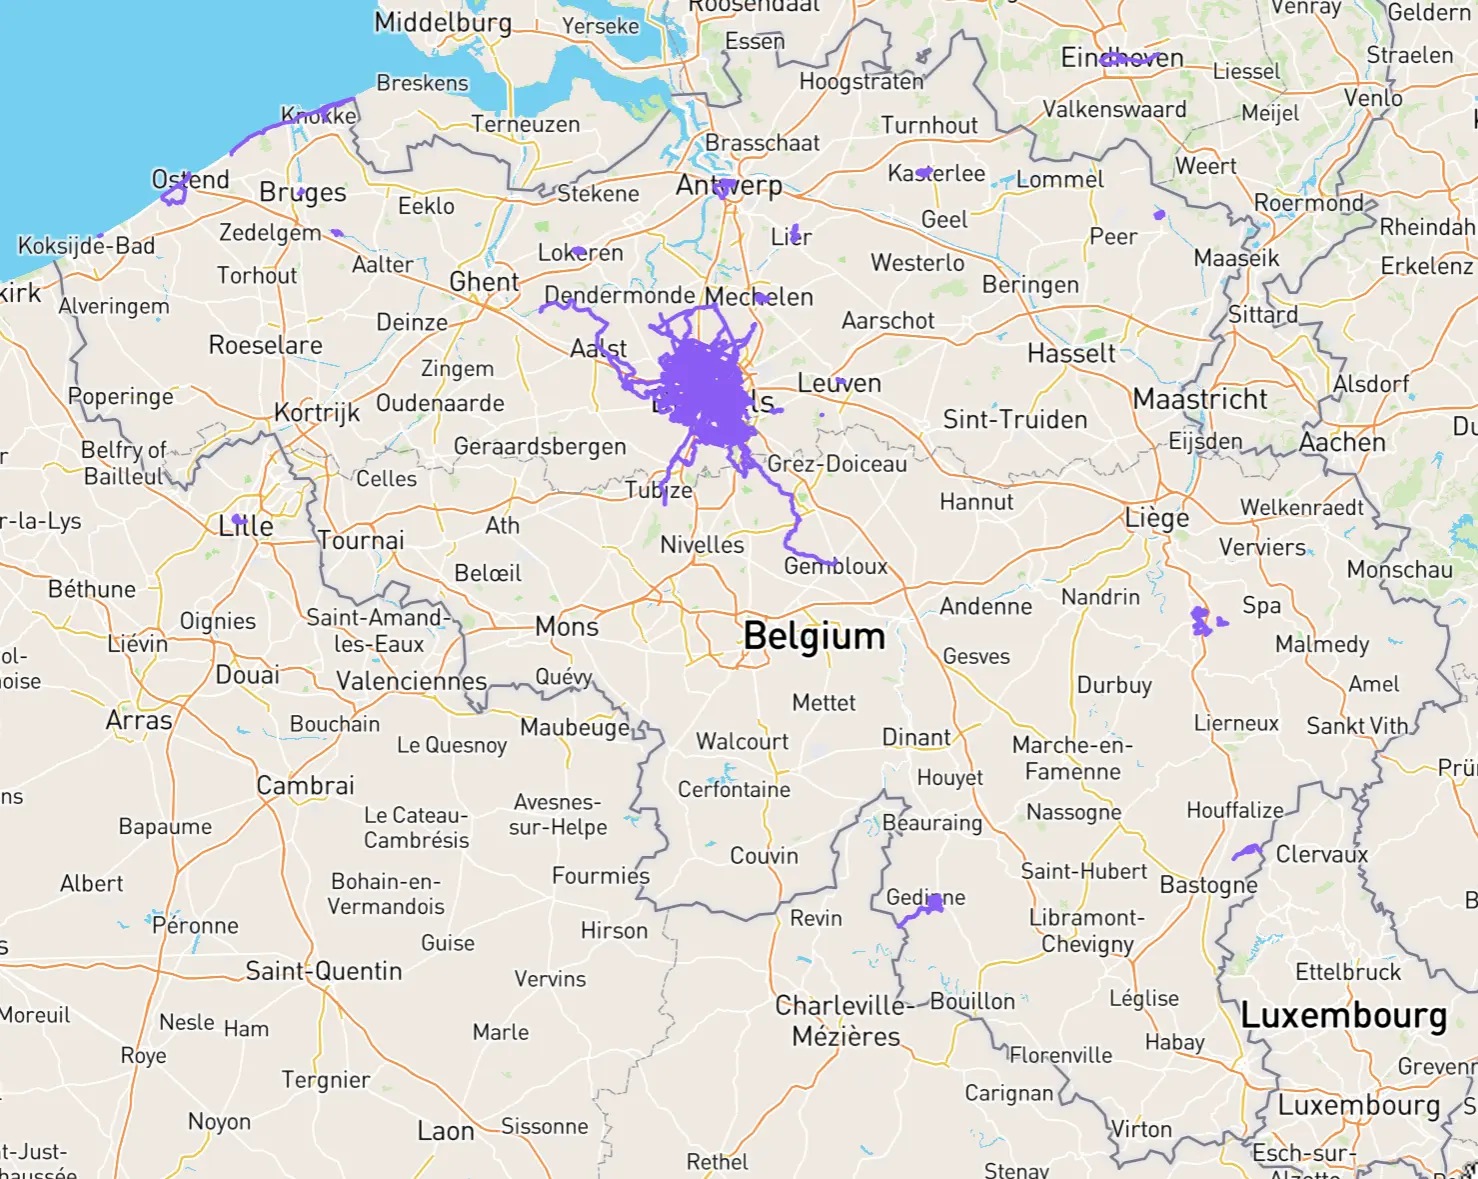 Current situation of my Belgian heatmap. Still a lot of work on each end.